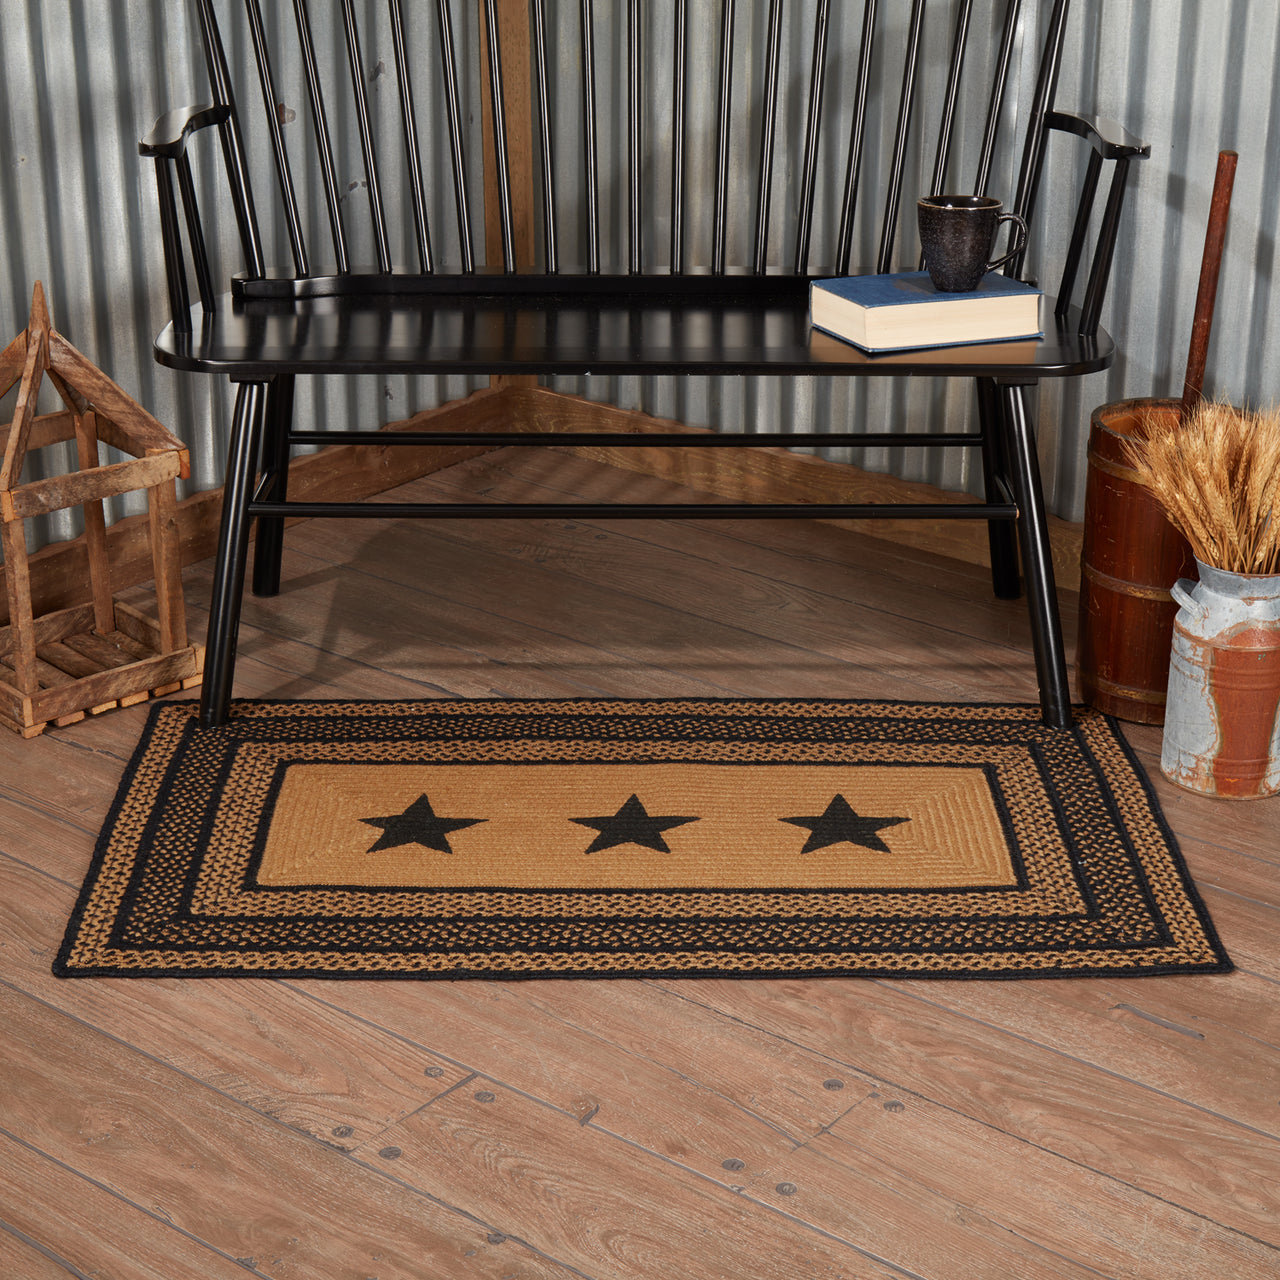 Farmhouse Jute Braided Rug Rect Stencil Stars 27"x48" with Rug Pad VHC Brands